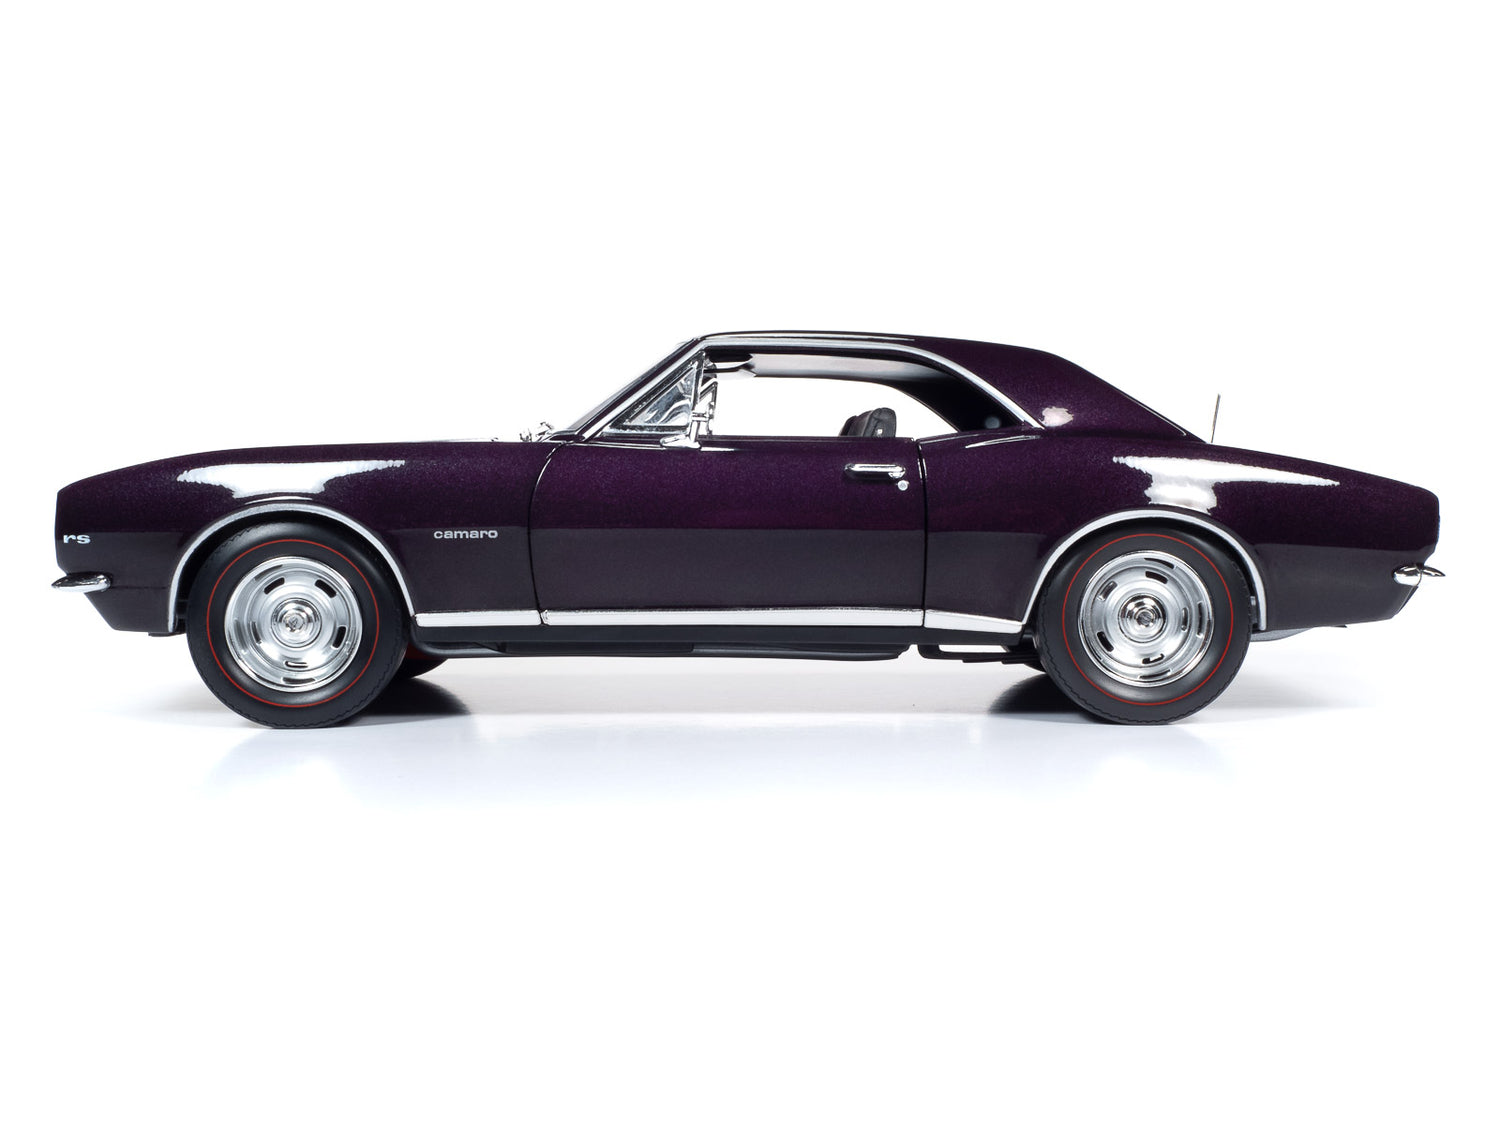 American Muscle 1967 Chevrolet Camaro Z/28 RS (MCACN) 1:18 Scale Diecast